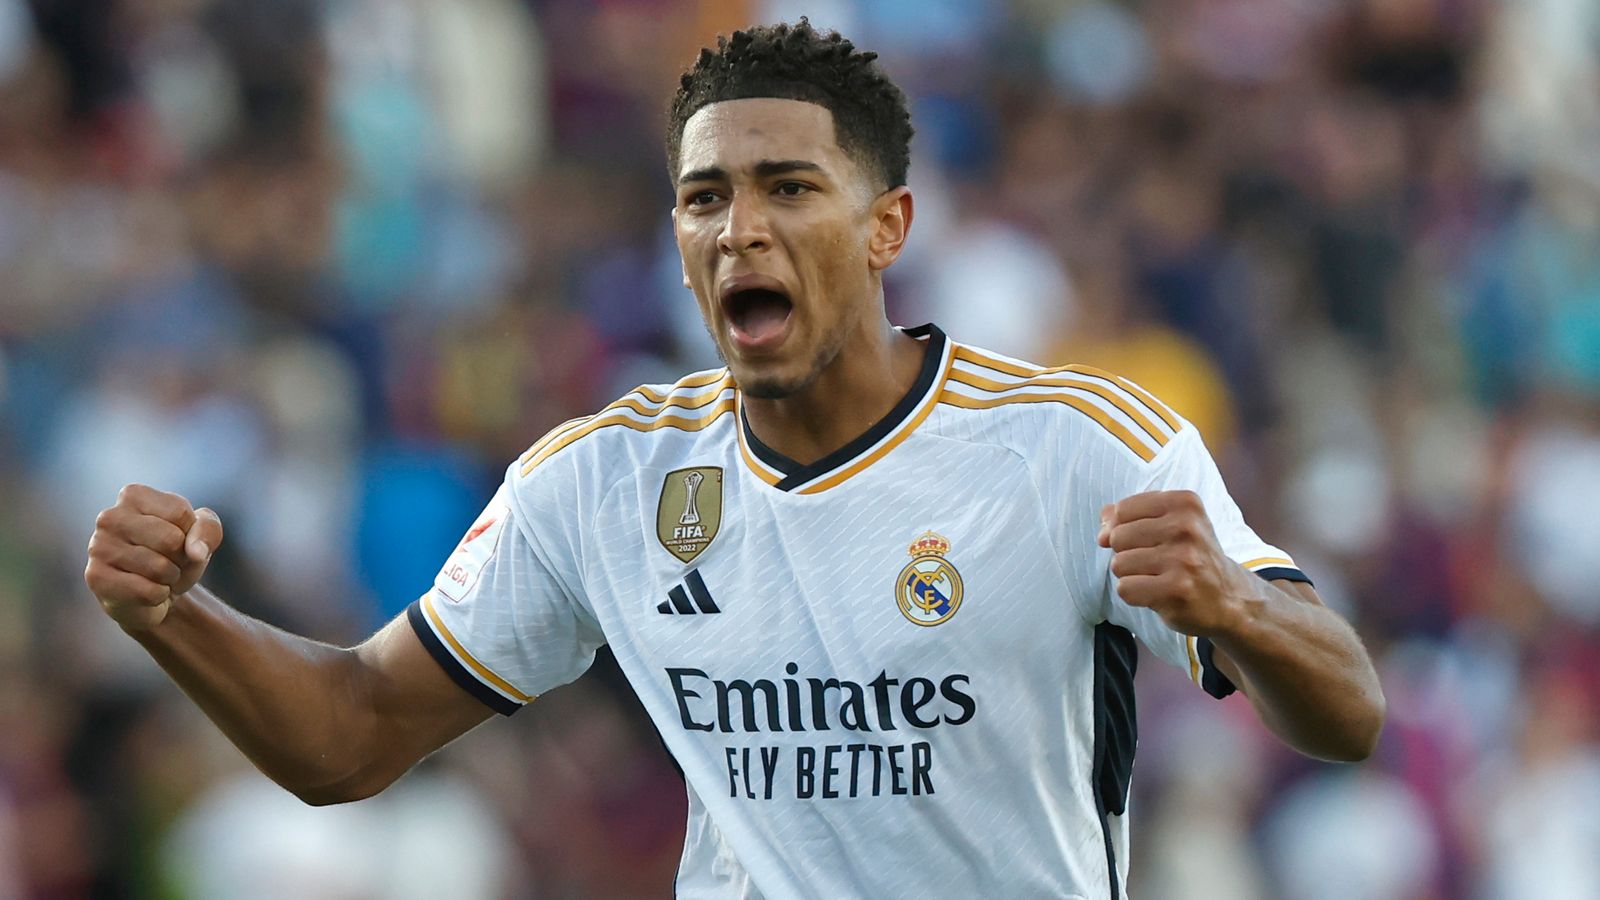 Carlo Ancelotti tells Real Madrid players 'get used to Jude